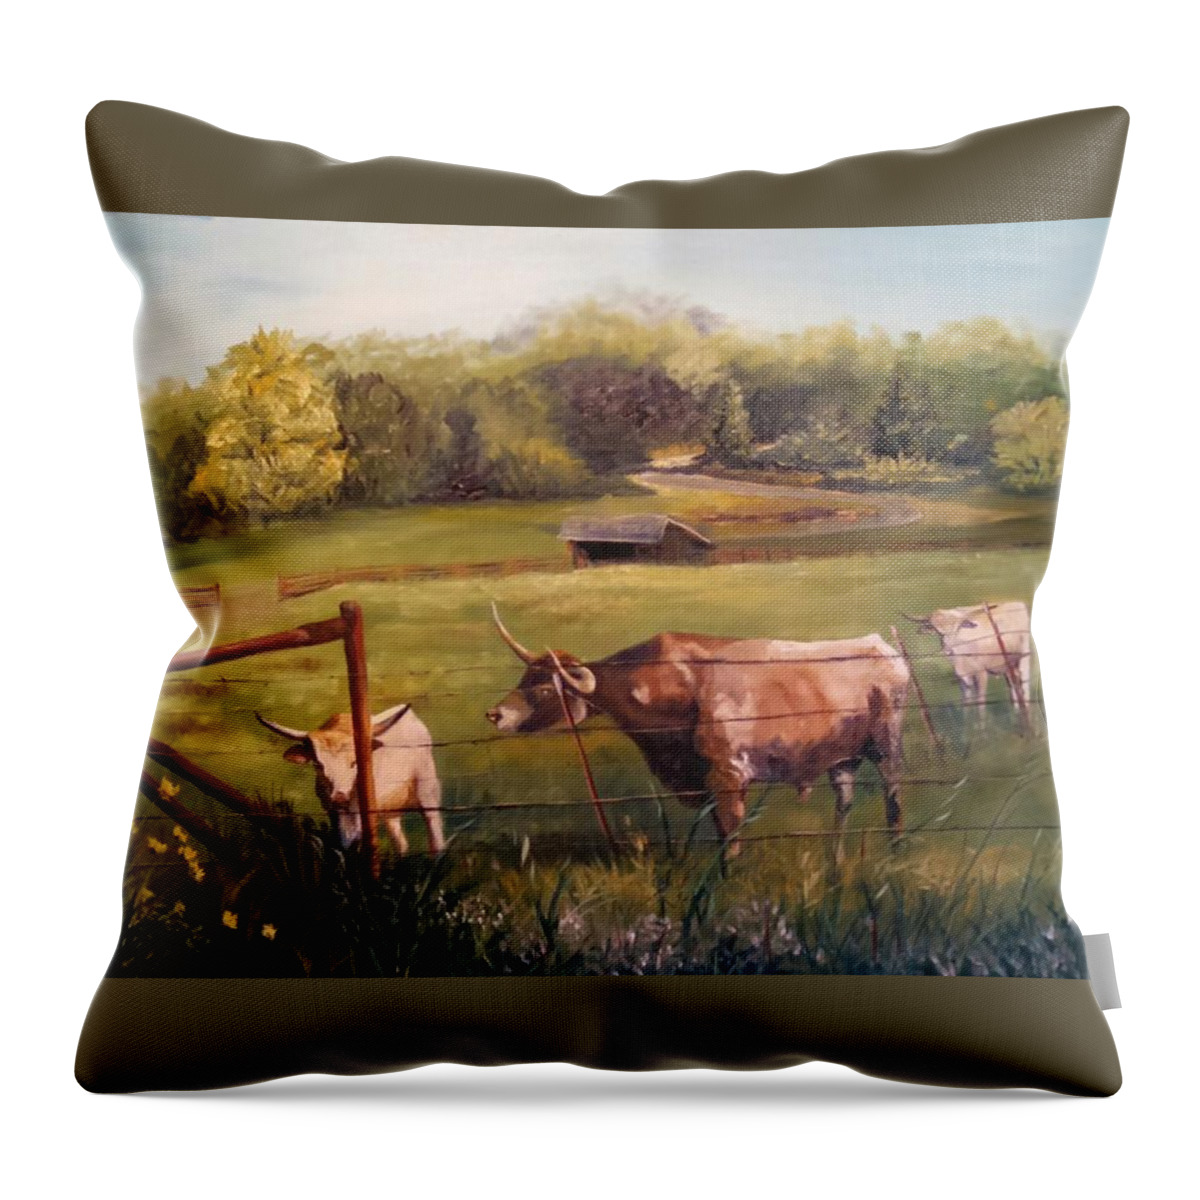 Longhorn Cattle Throw Pillow featuring the painting Courtship Across The Fence Line by Connie Rish